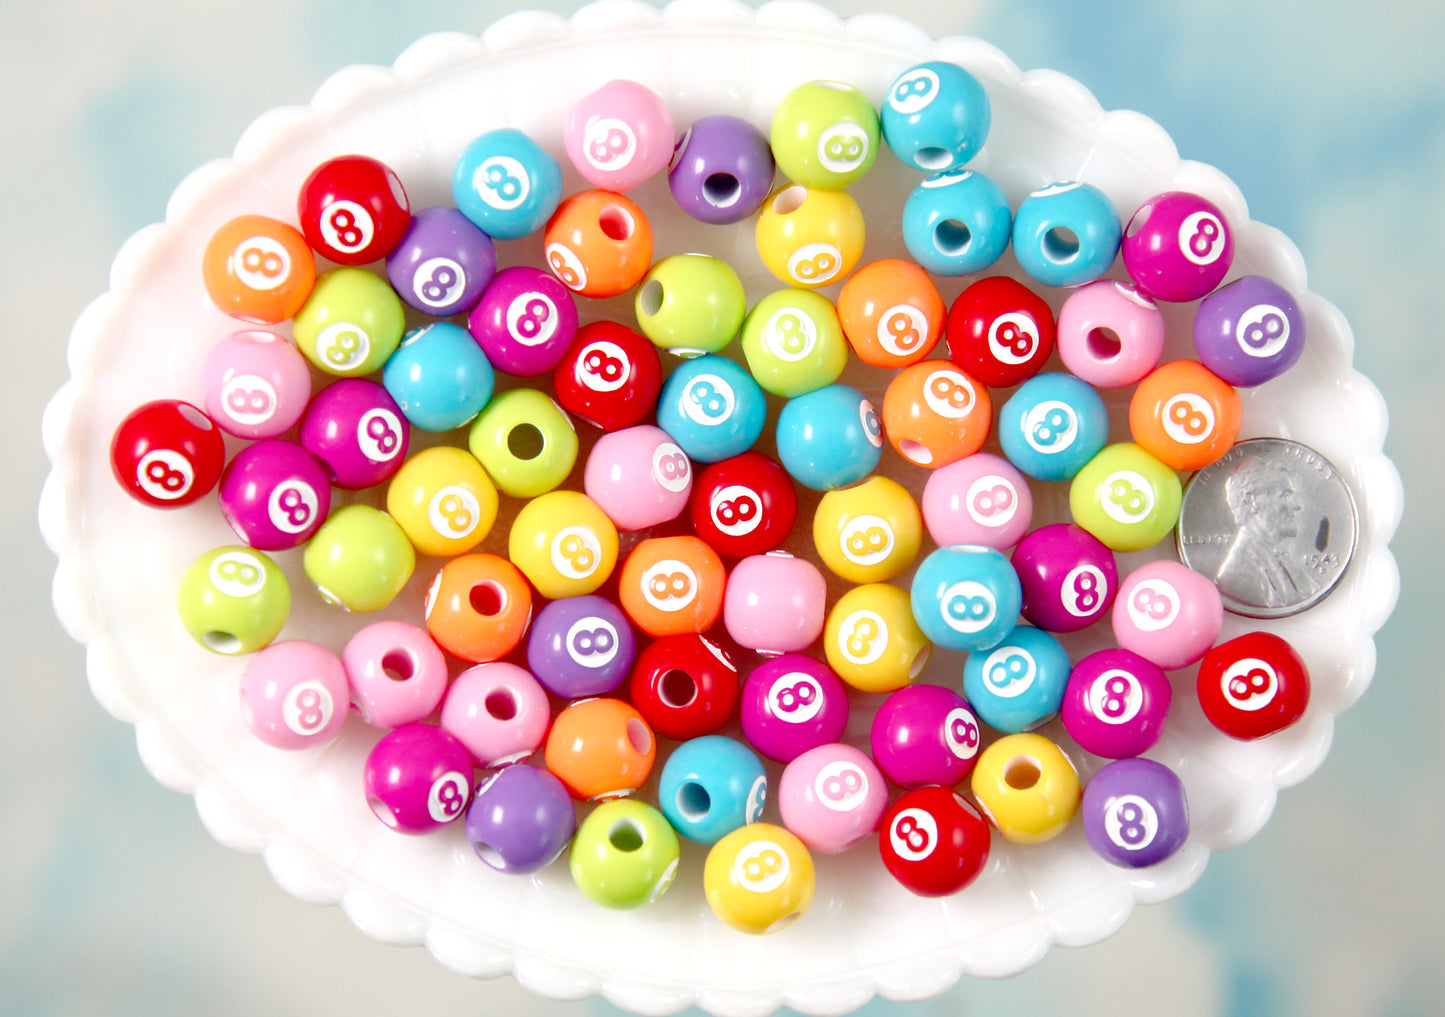 Colorful 8ball Beads - 10mm 8-ball Mixed Color with White Round Billiard Eight Ball Pool Ball Acrylic or Resin Beads - 65 pc set